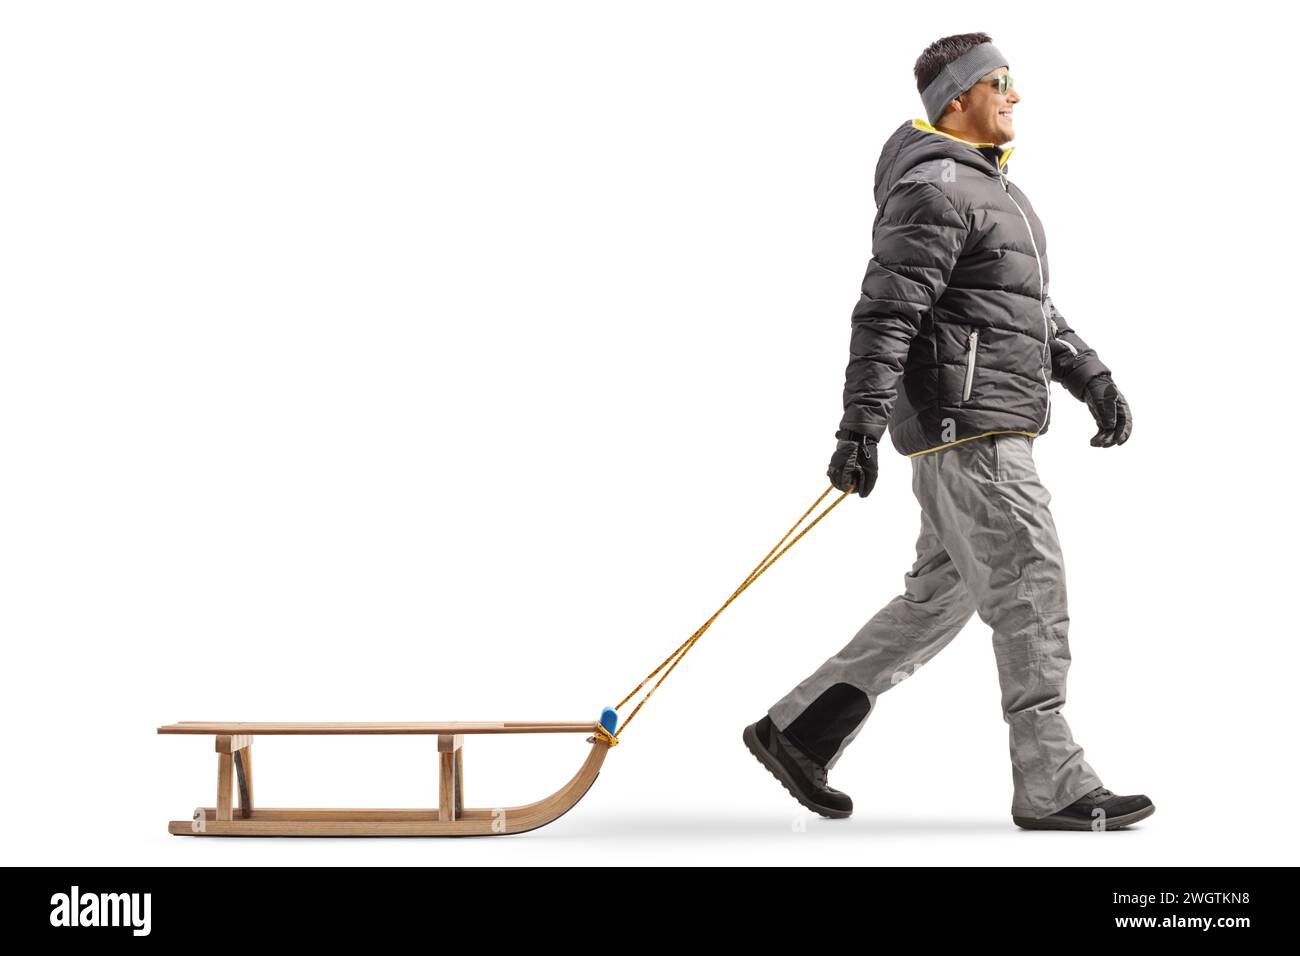 Full length profile shot of a man in a winter jacket walking and pulling a wooden sled isolated on white background Stock Photo